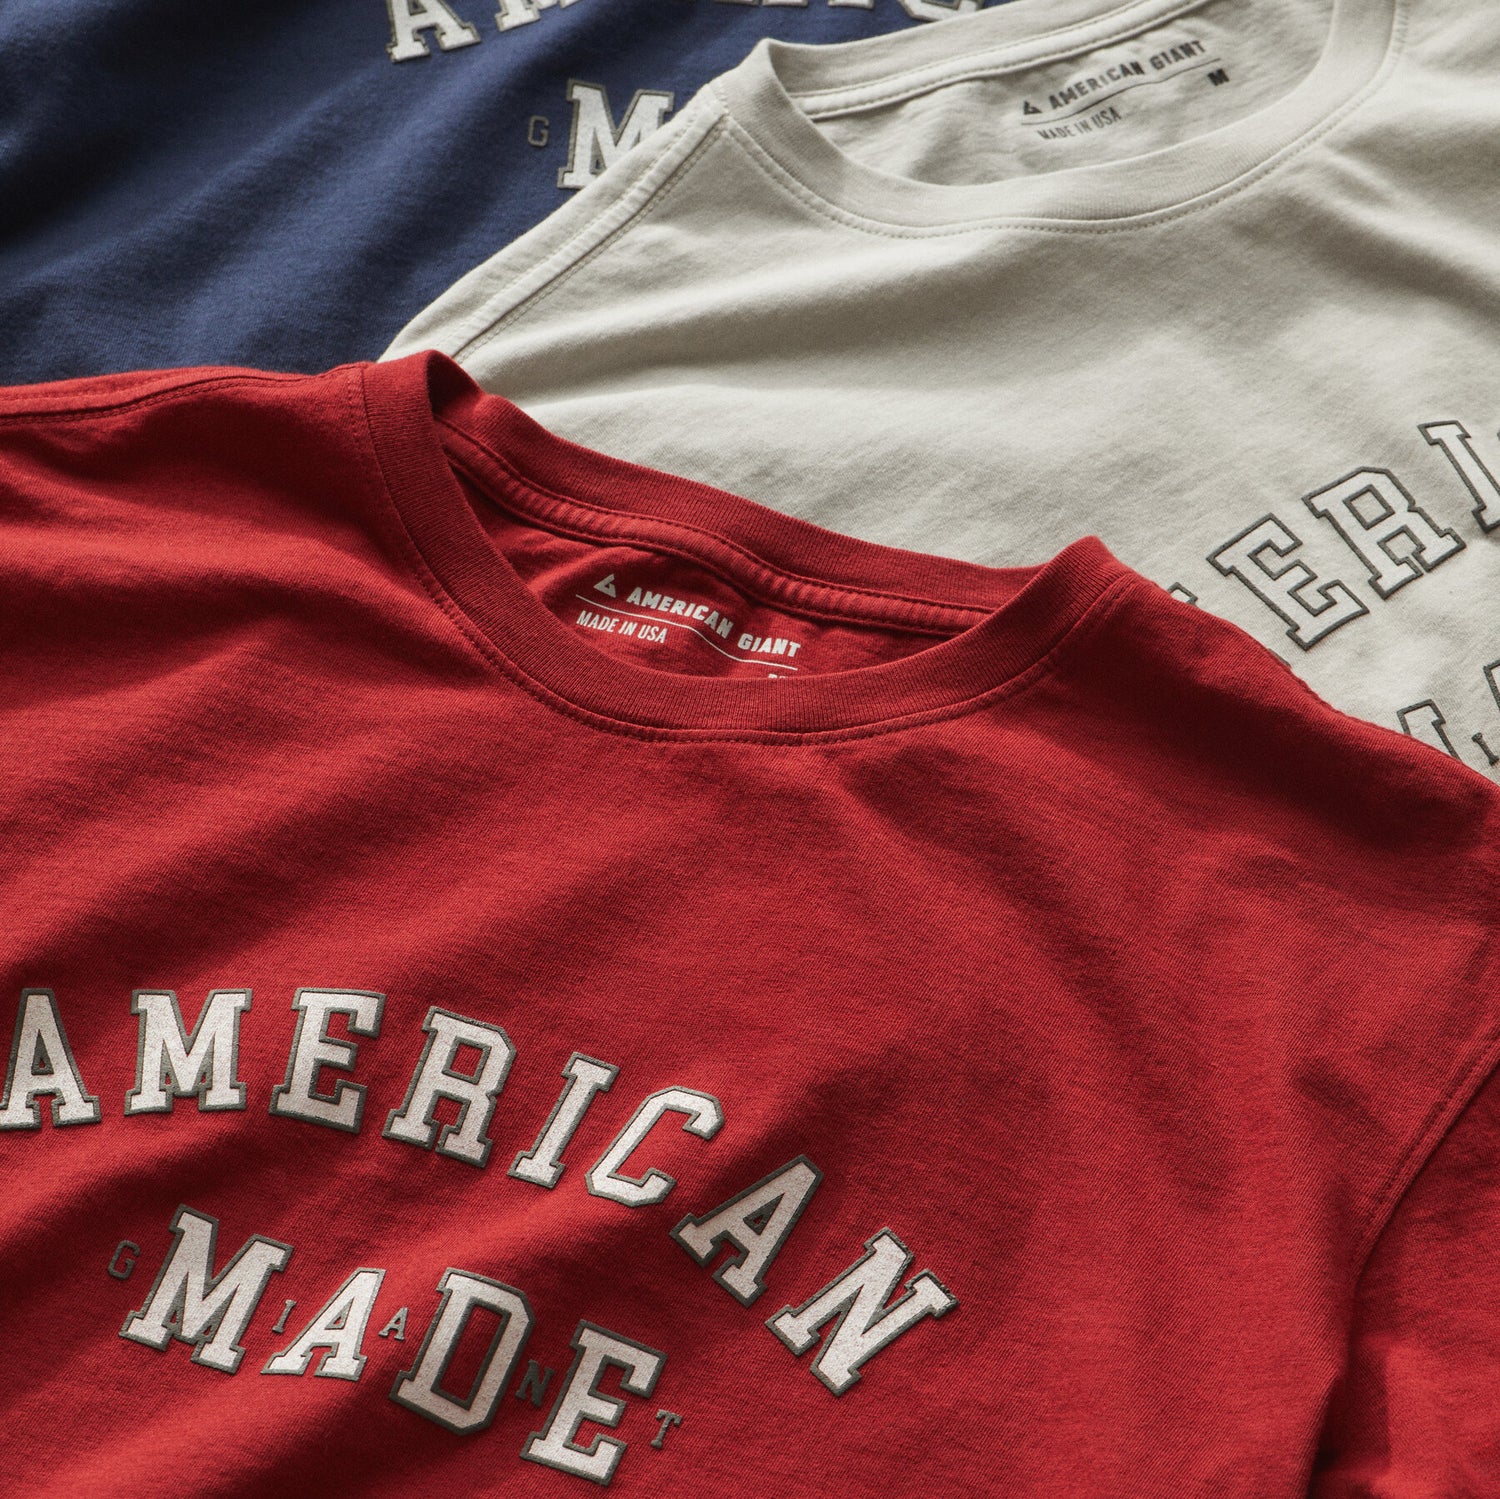 Are Shirts Made In The USA Limited In Terms Of Style And Design?